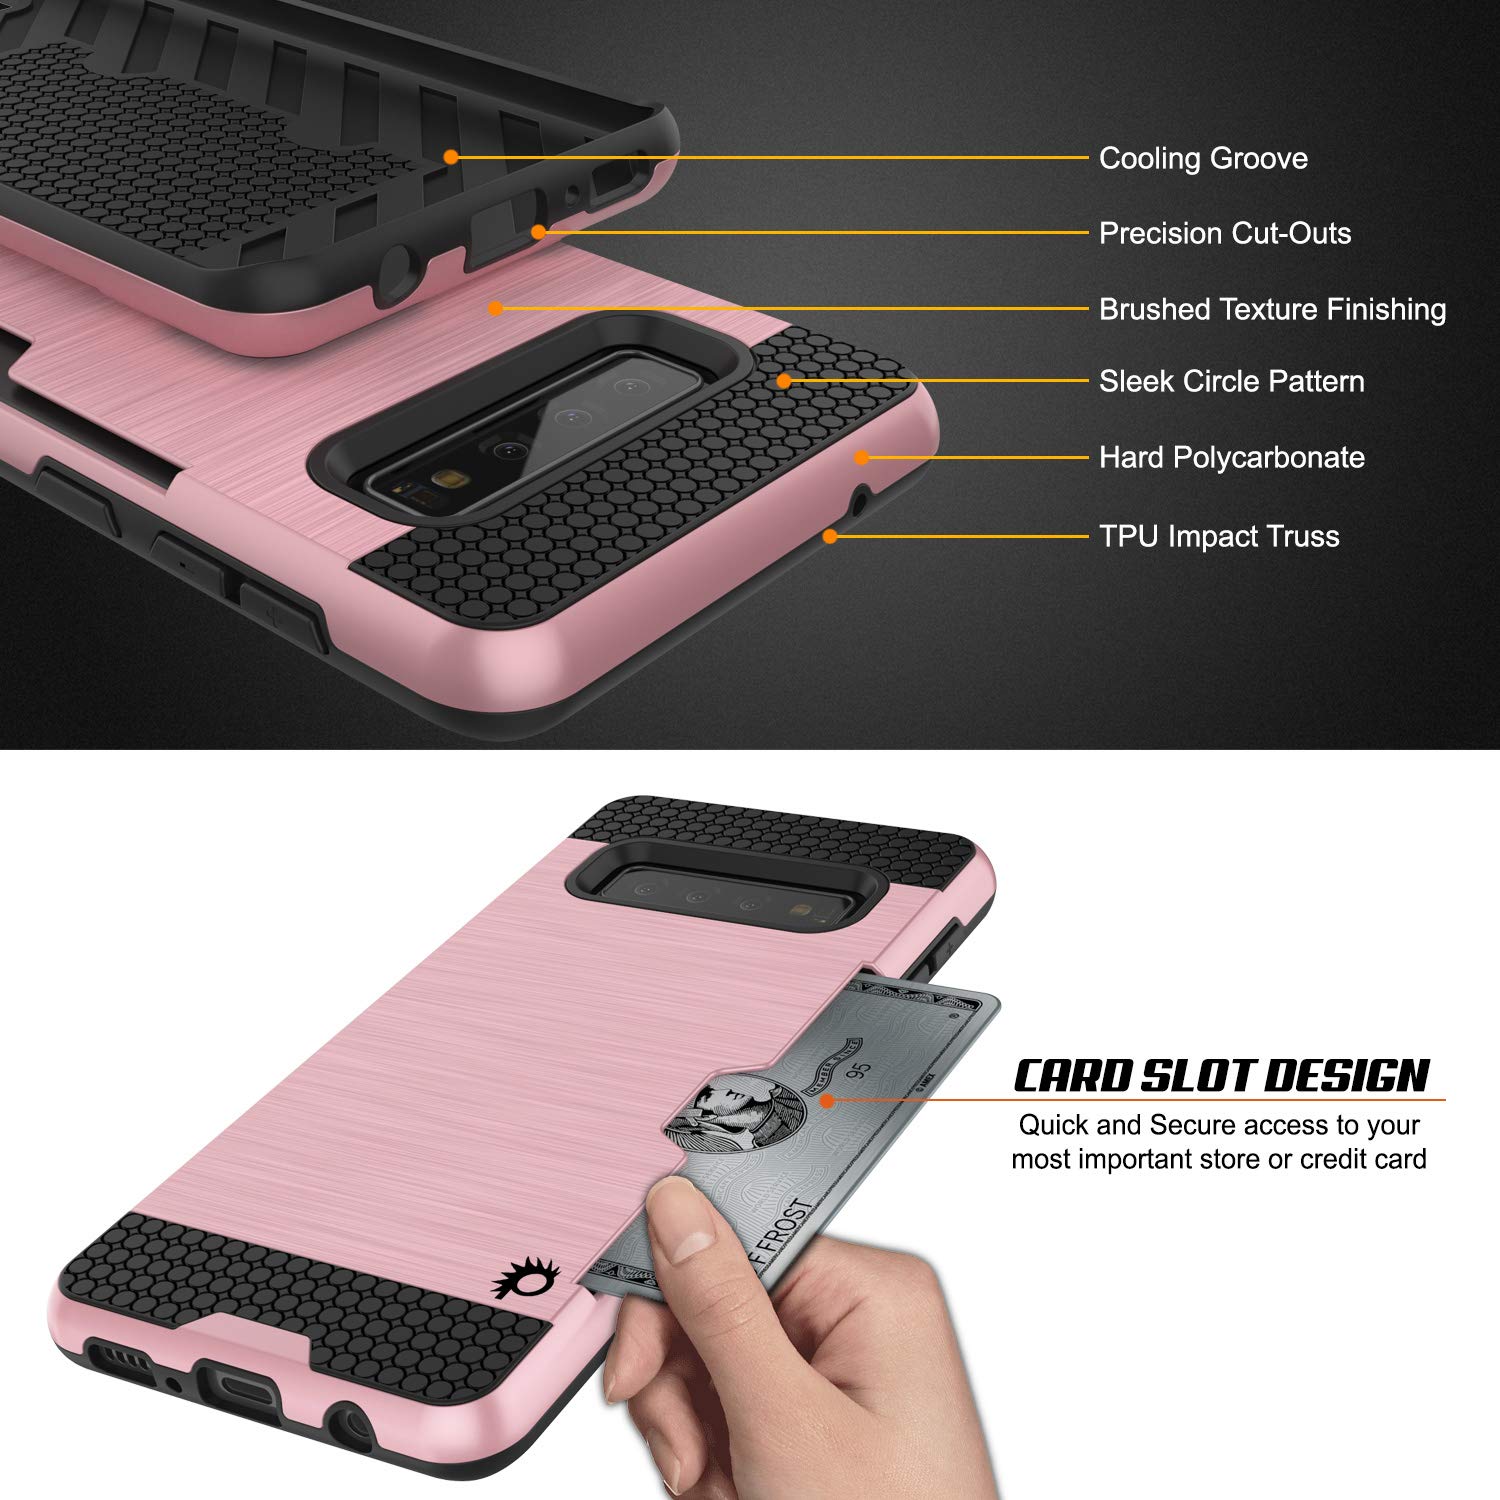 Galaxy S10+ Plus  Case, PUNKcase [SLOT Series] [Slim Fit] Dual-Layer Armor Cover w/Integrated Anti-Shock System, Credit Card Slot [Rose Gold]